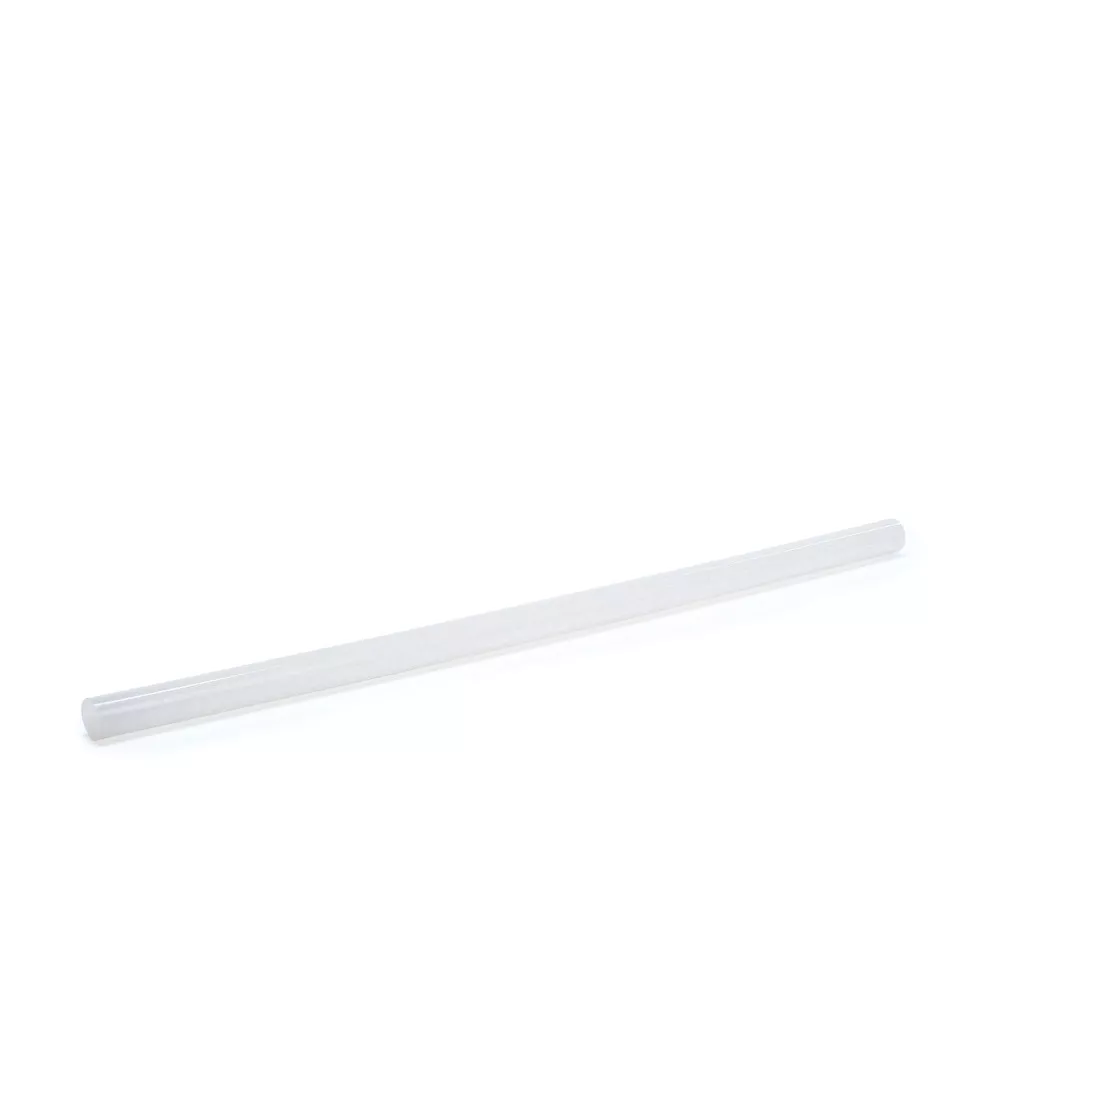 3M™ Hot Melt Adhesive 3792 AE, Clear, 0.45 in x 12 in, 11 lb/case